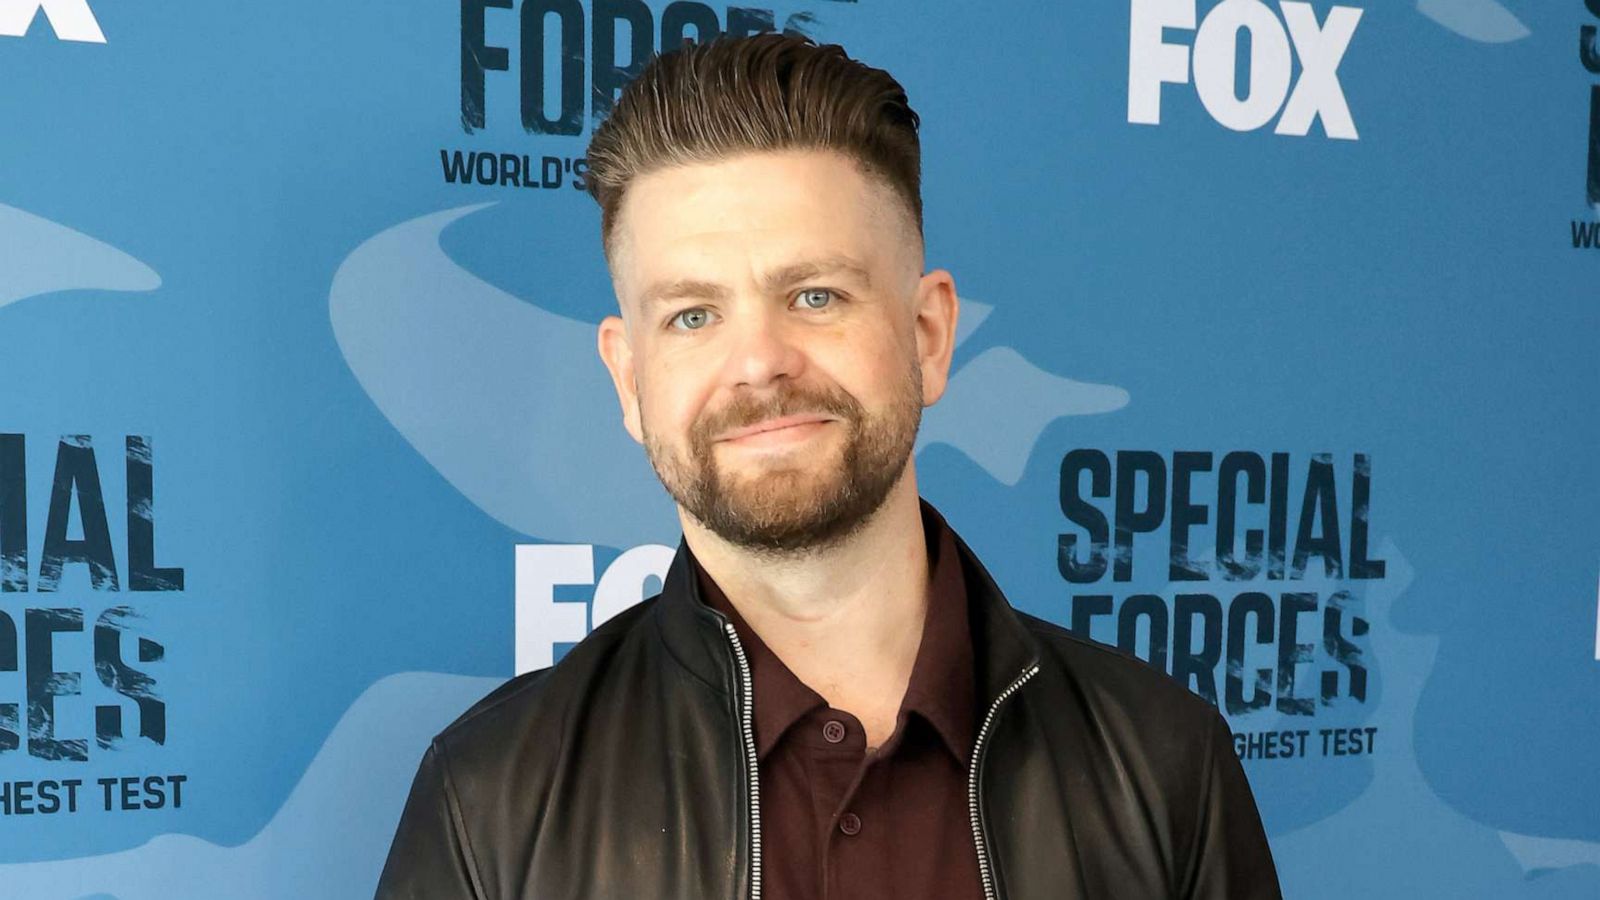 Jack Osbourne announces marriage to Aree Gearhart: 'All in' - ABC News